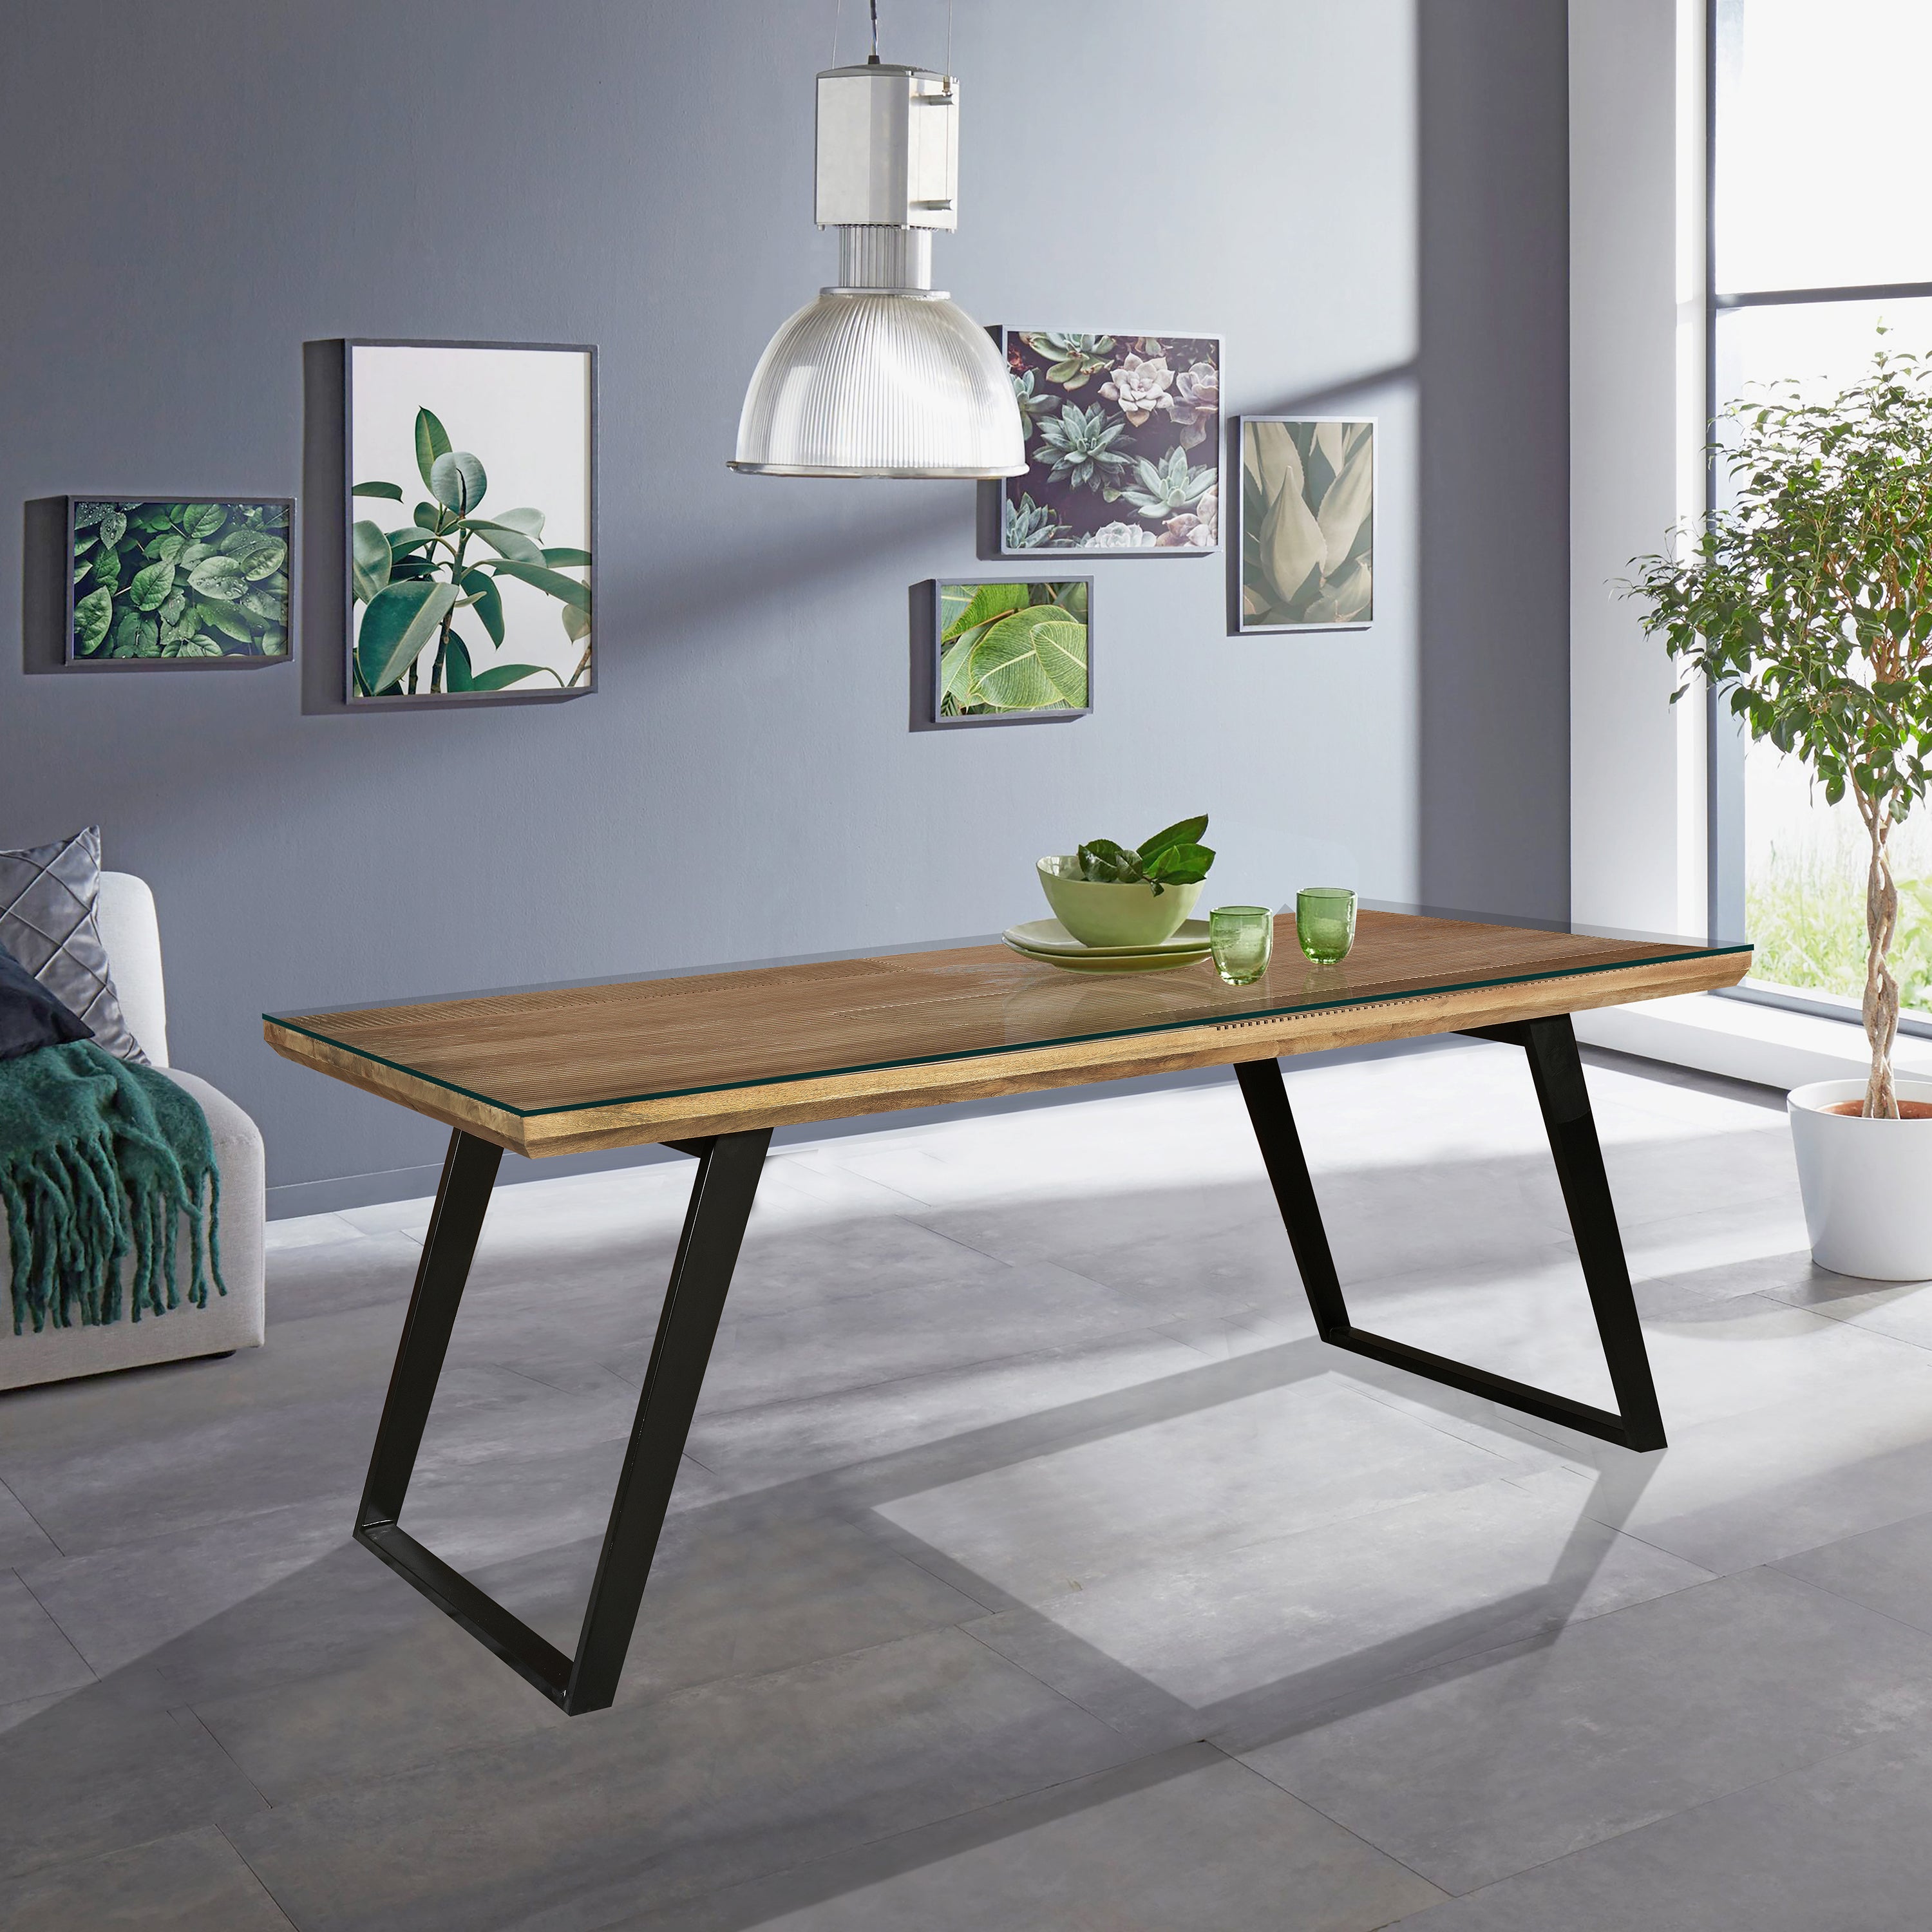 Indus Valley Iconic 6 Seater Dining Table